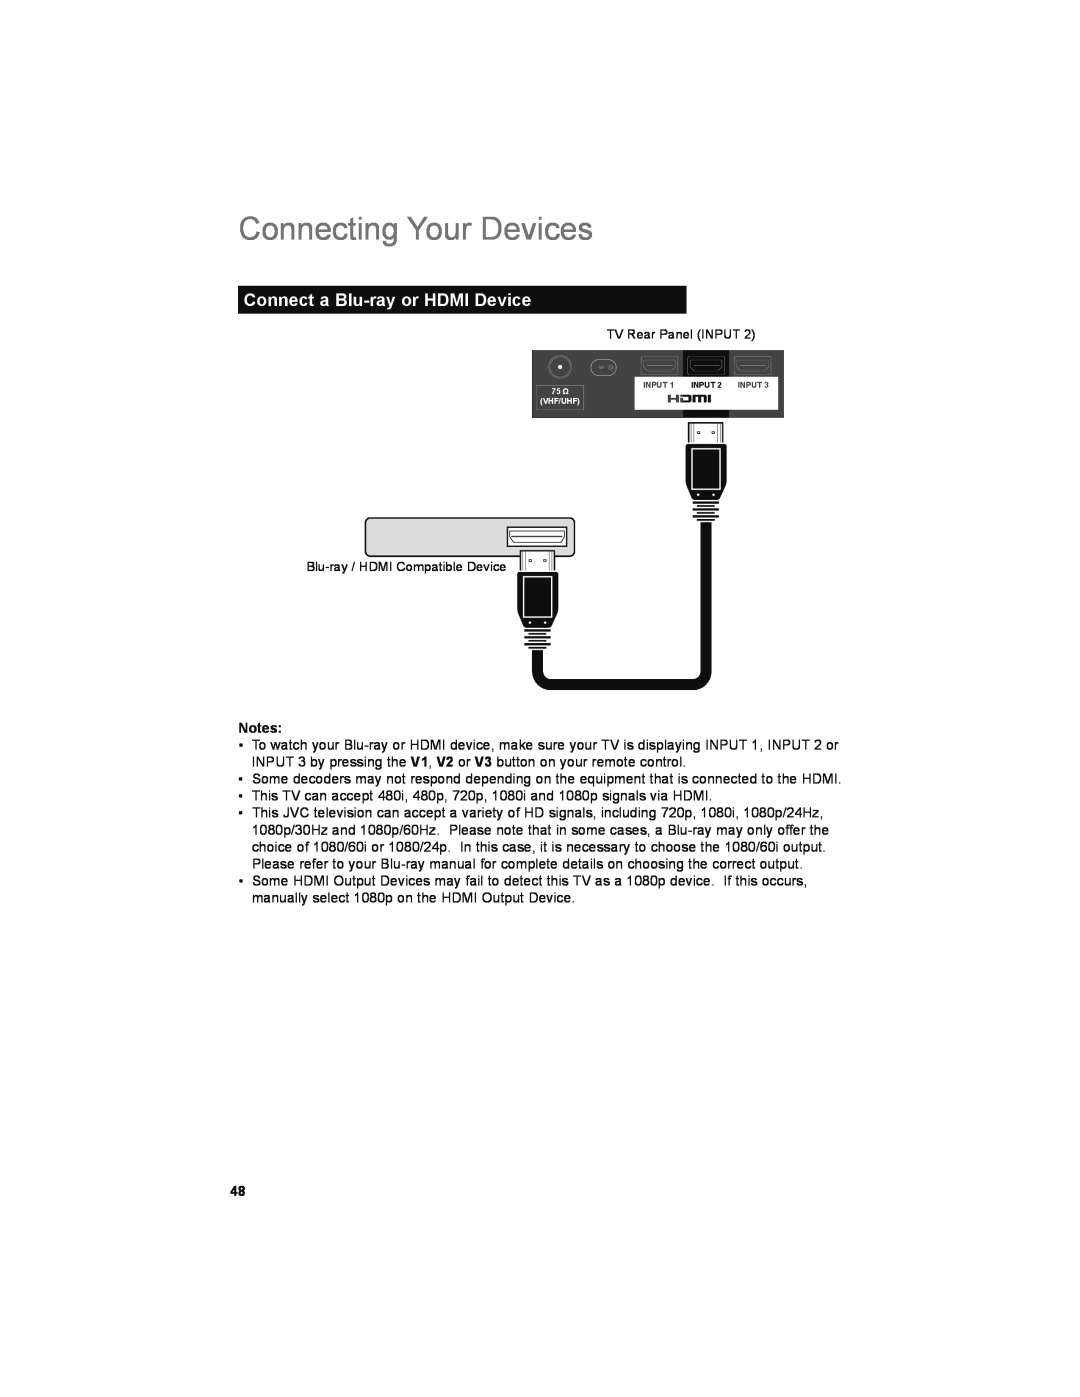 JVC LT-32JM30 manual Connect a Blu-ray or HDMI Device, Connecting Your Devices, TV Rear Panel INPUT 